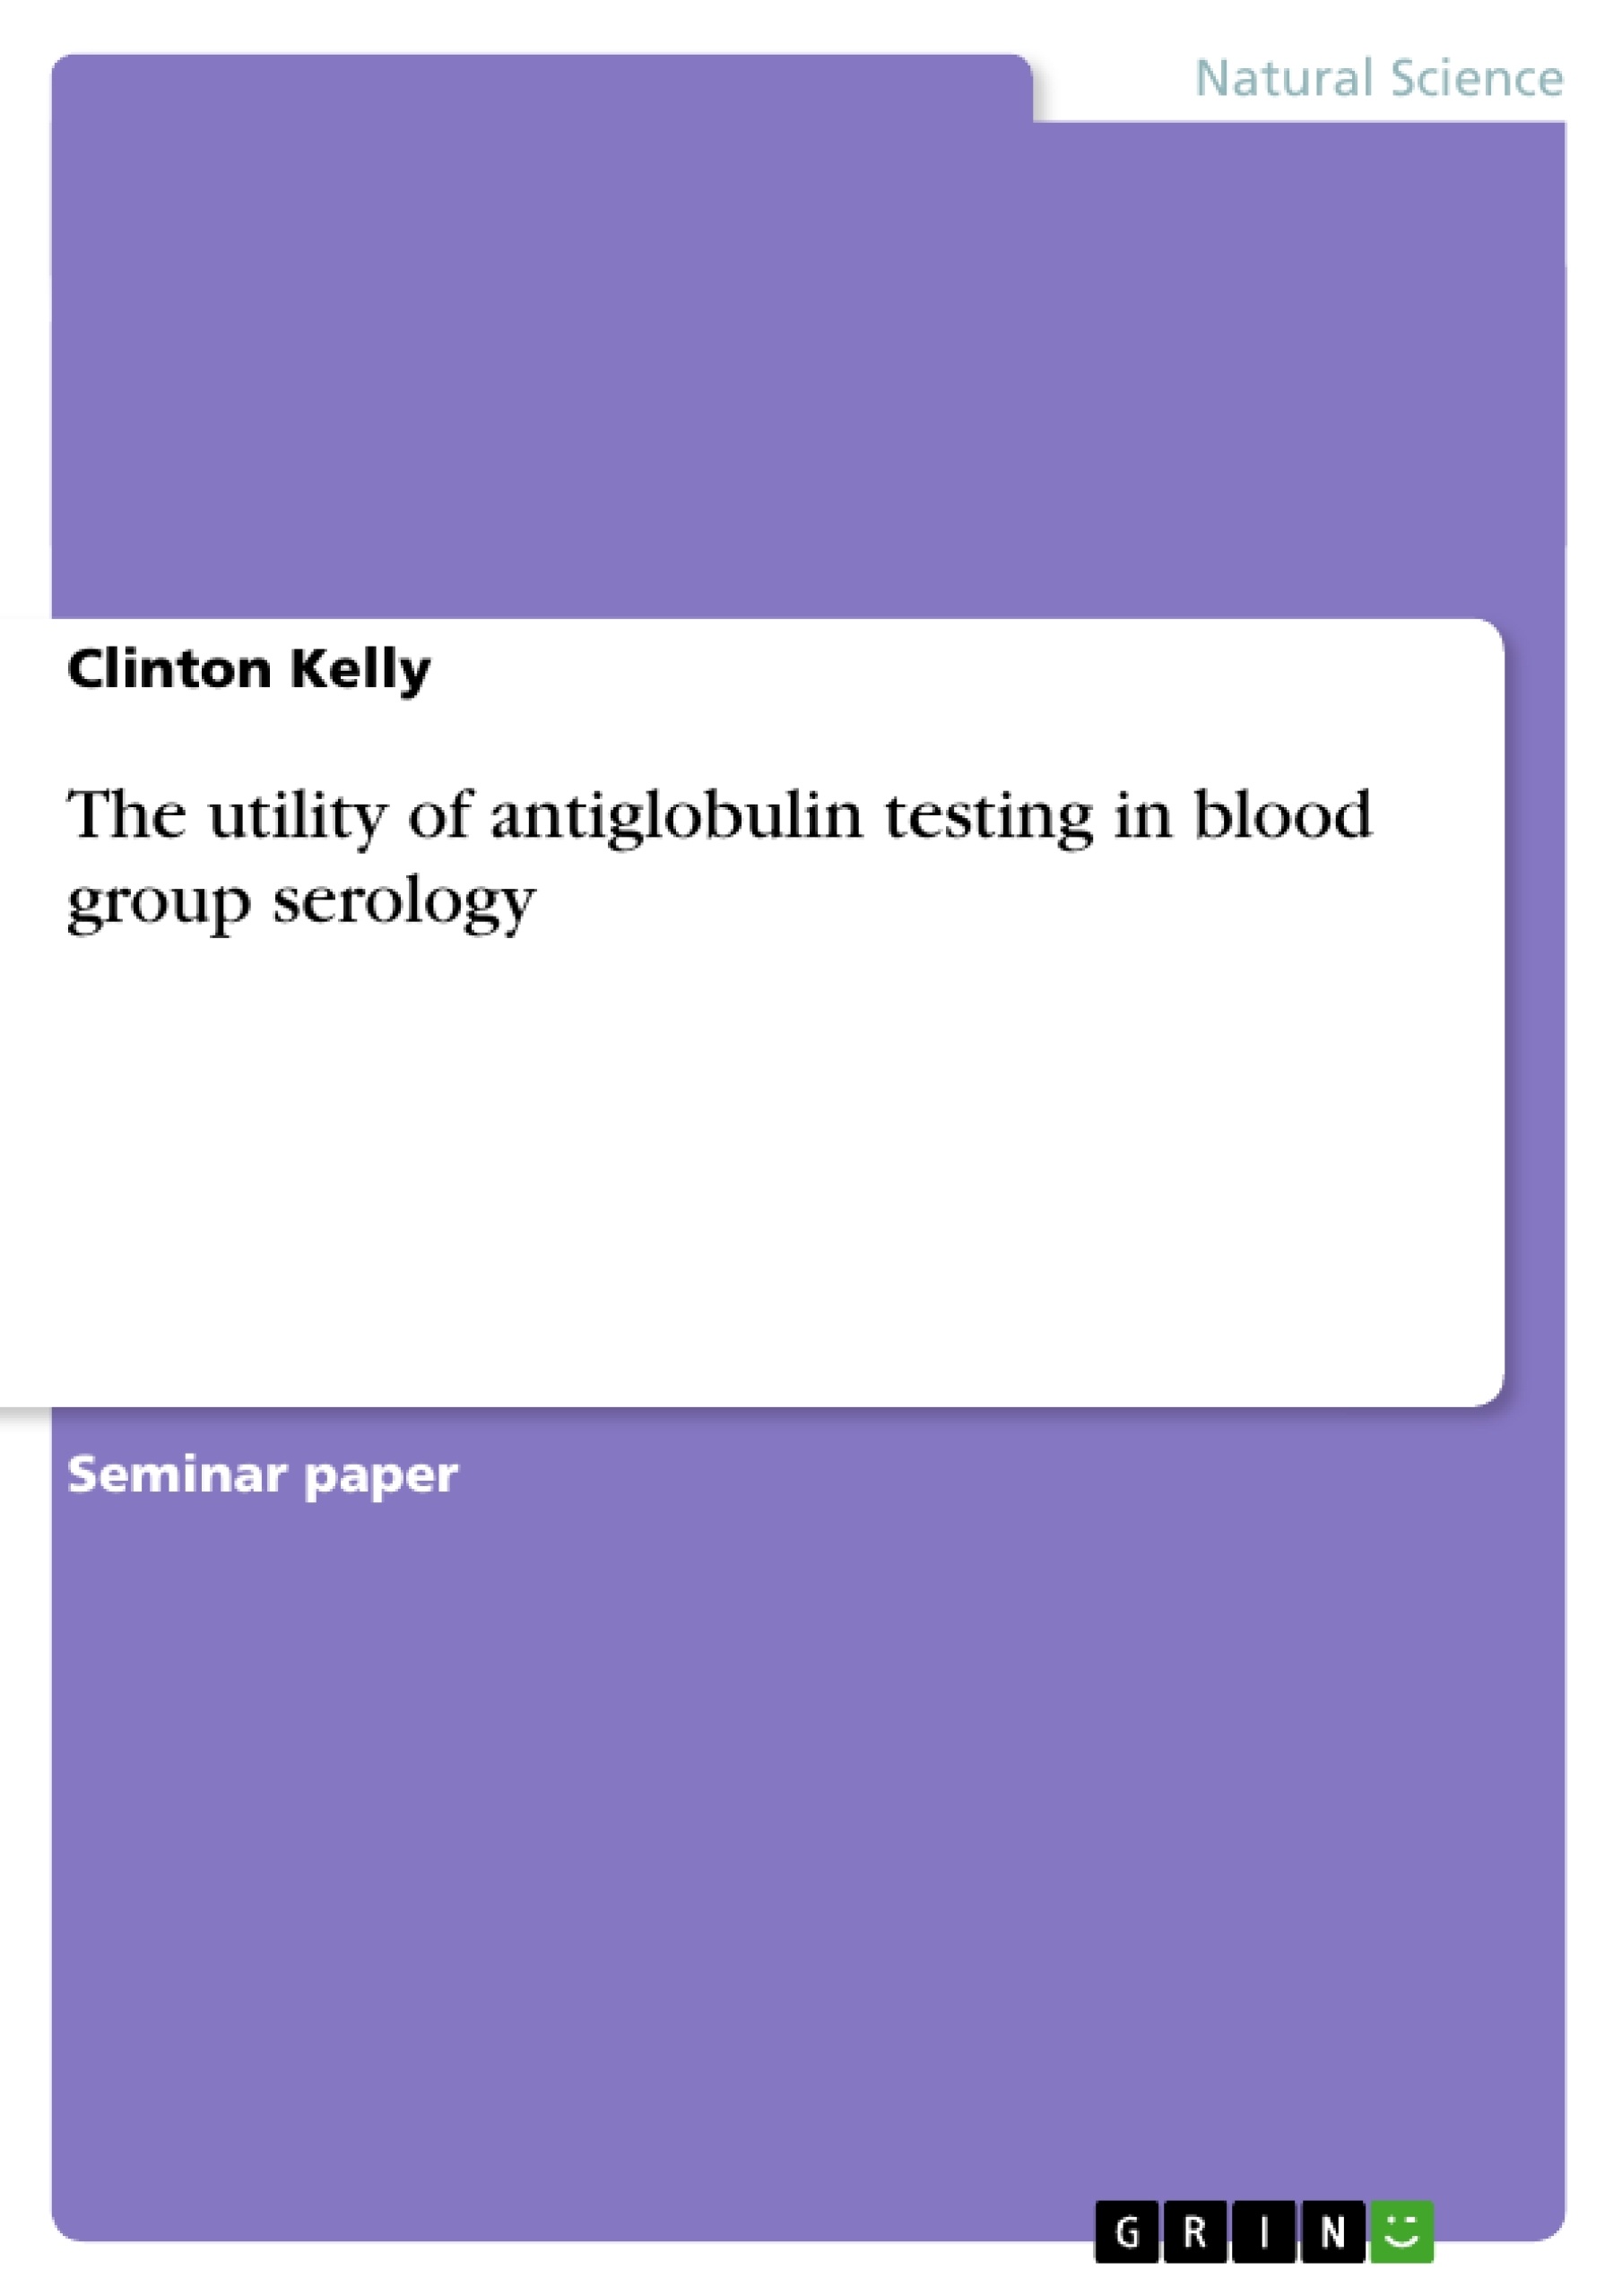 Title: The utility of antiglobulin testing in blood group serology